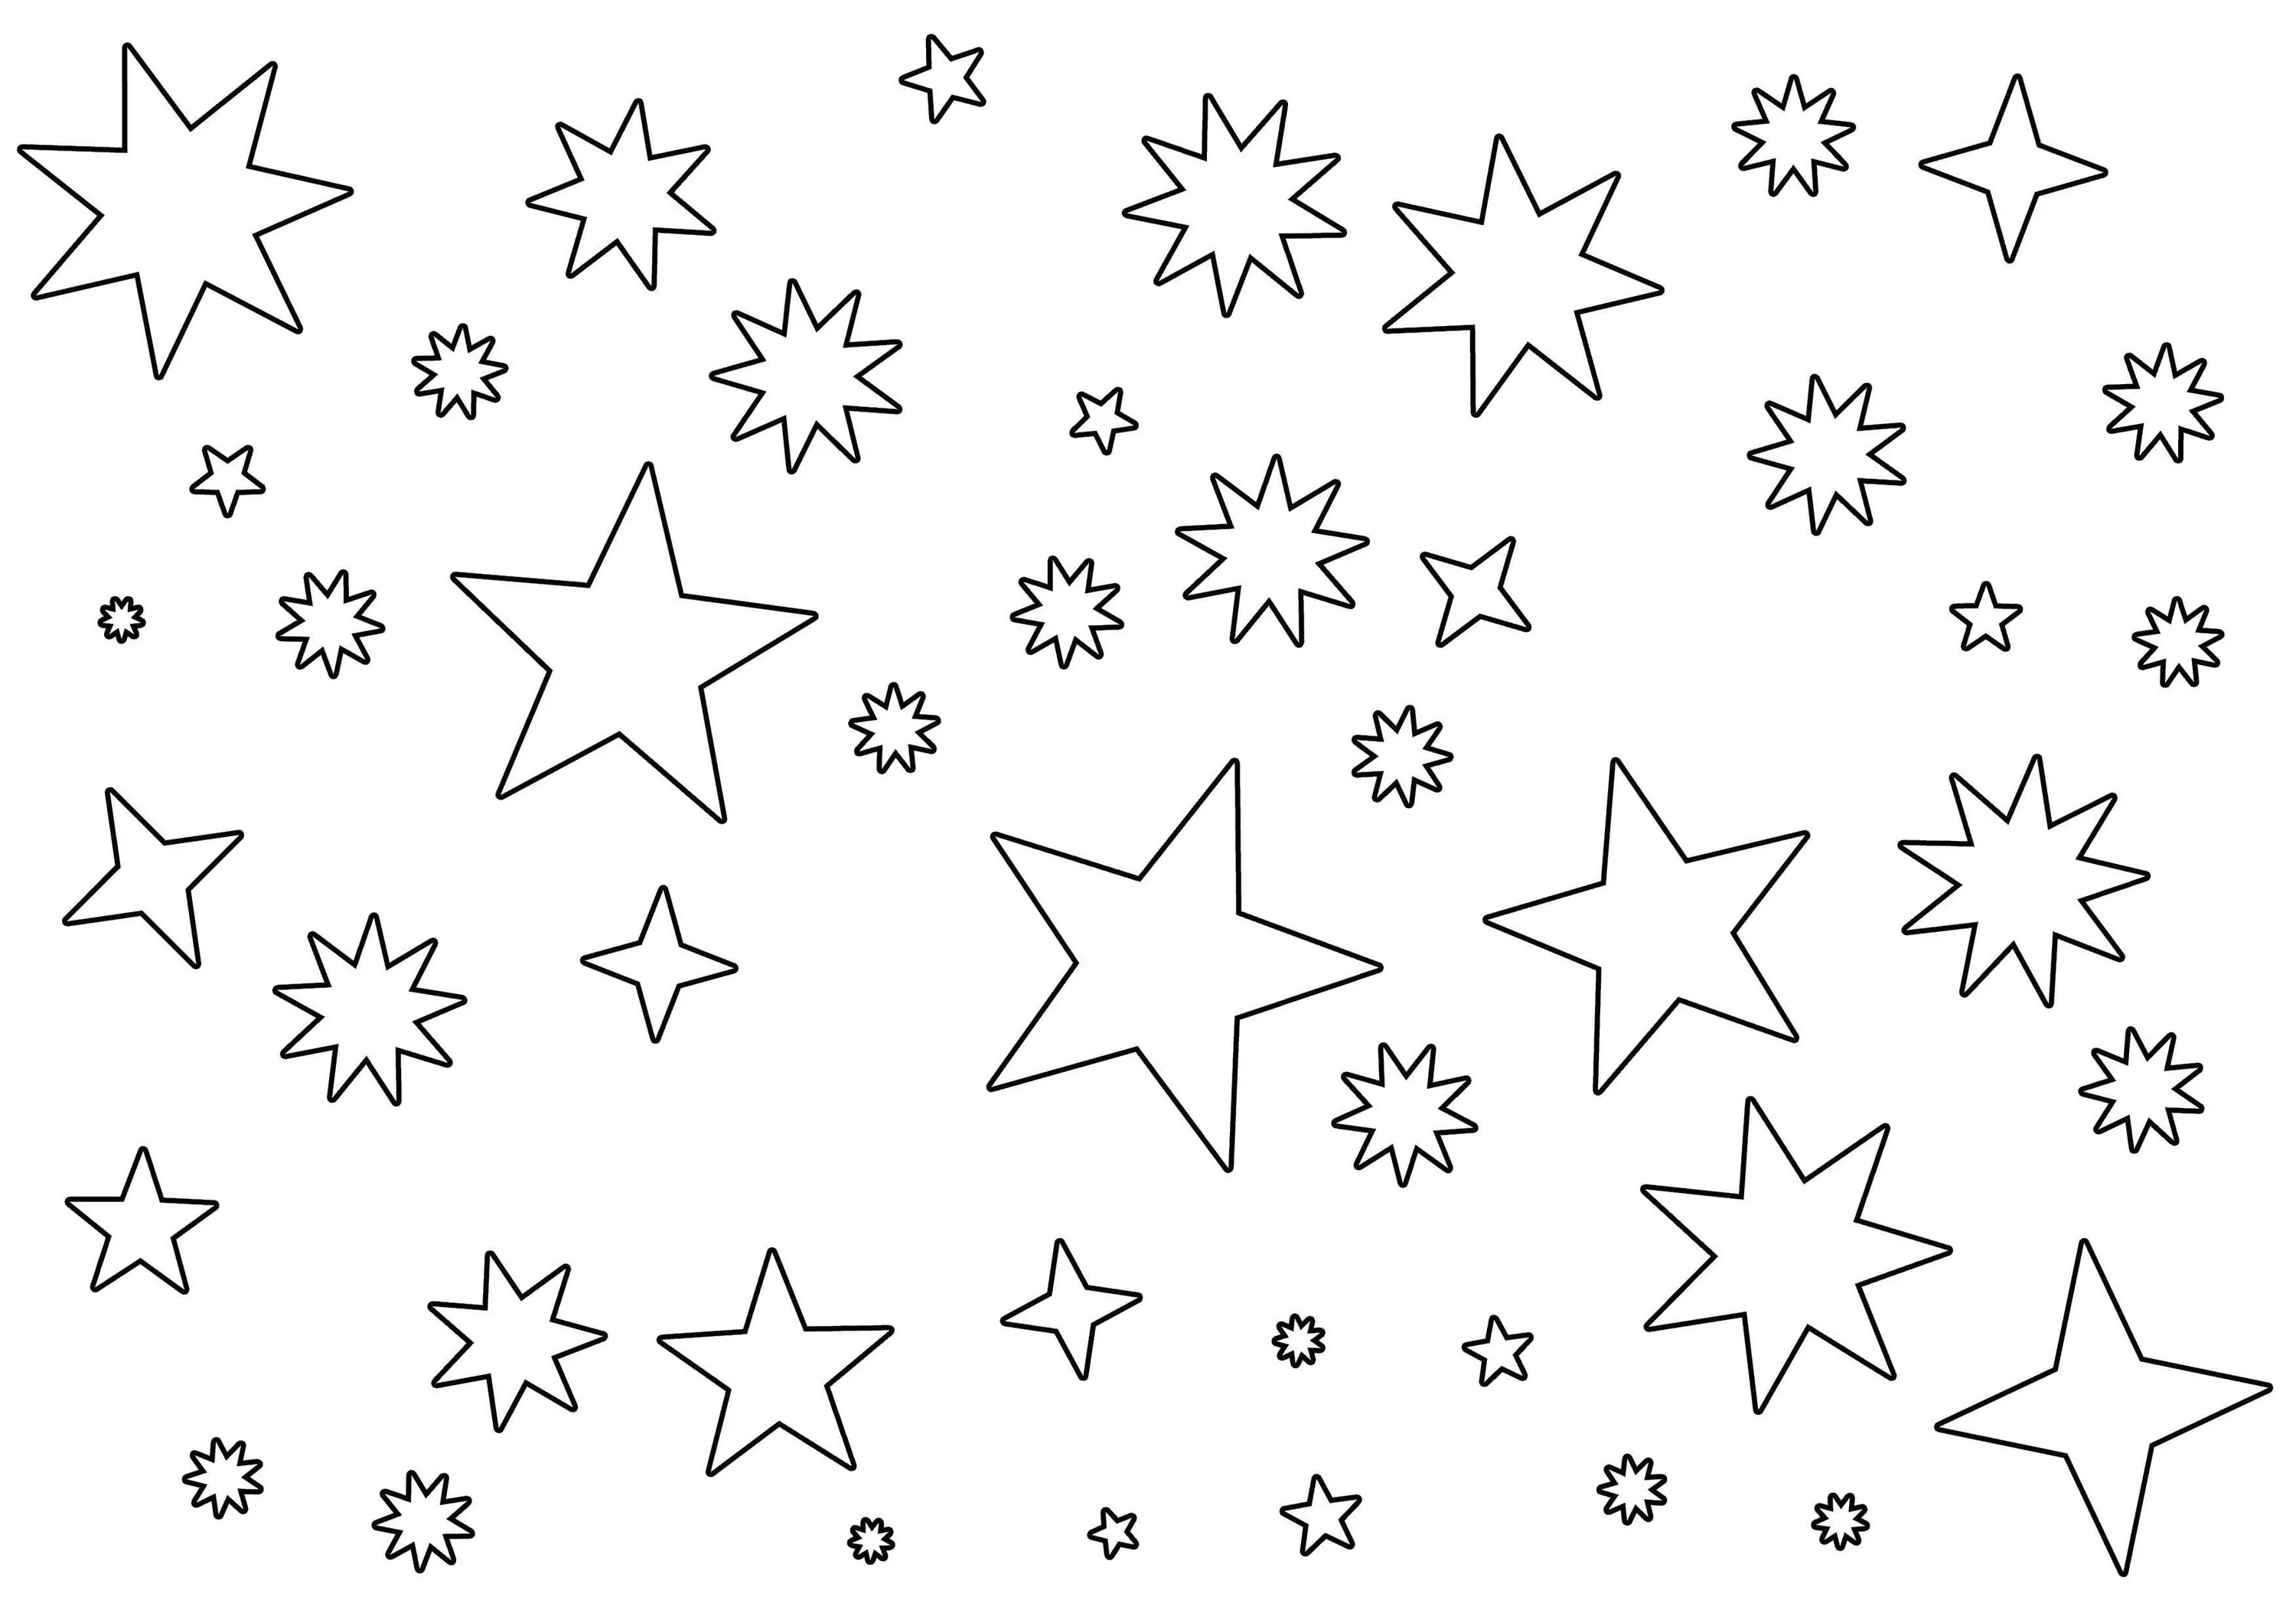 Calming little stars coloring page